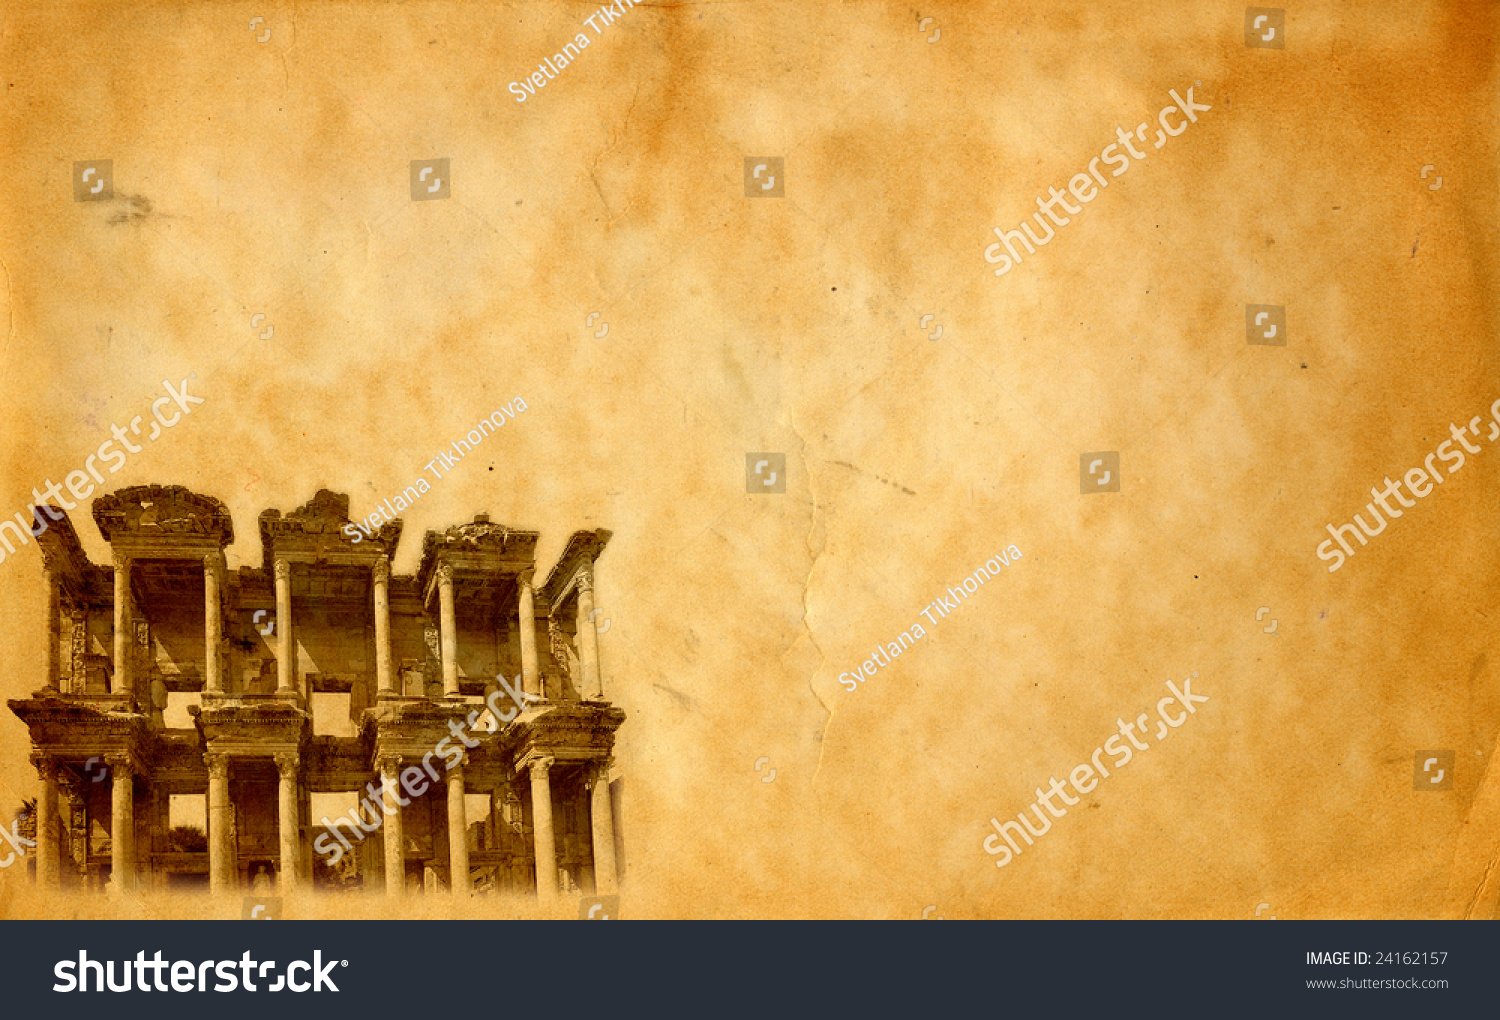 Archaeological Background Old Paper Image Library Stock Photo